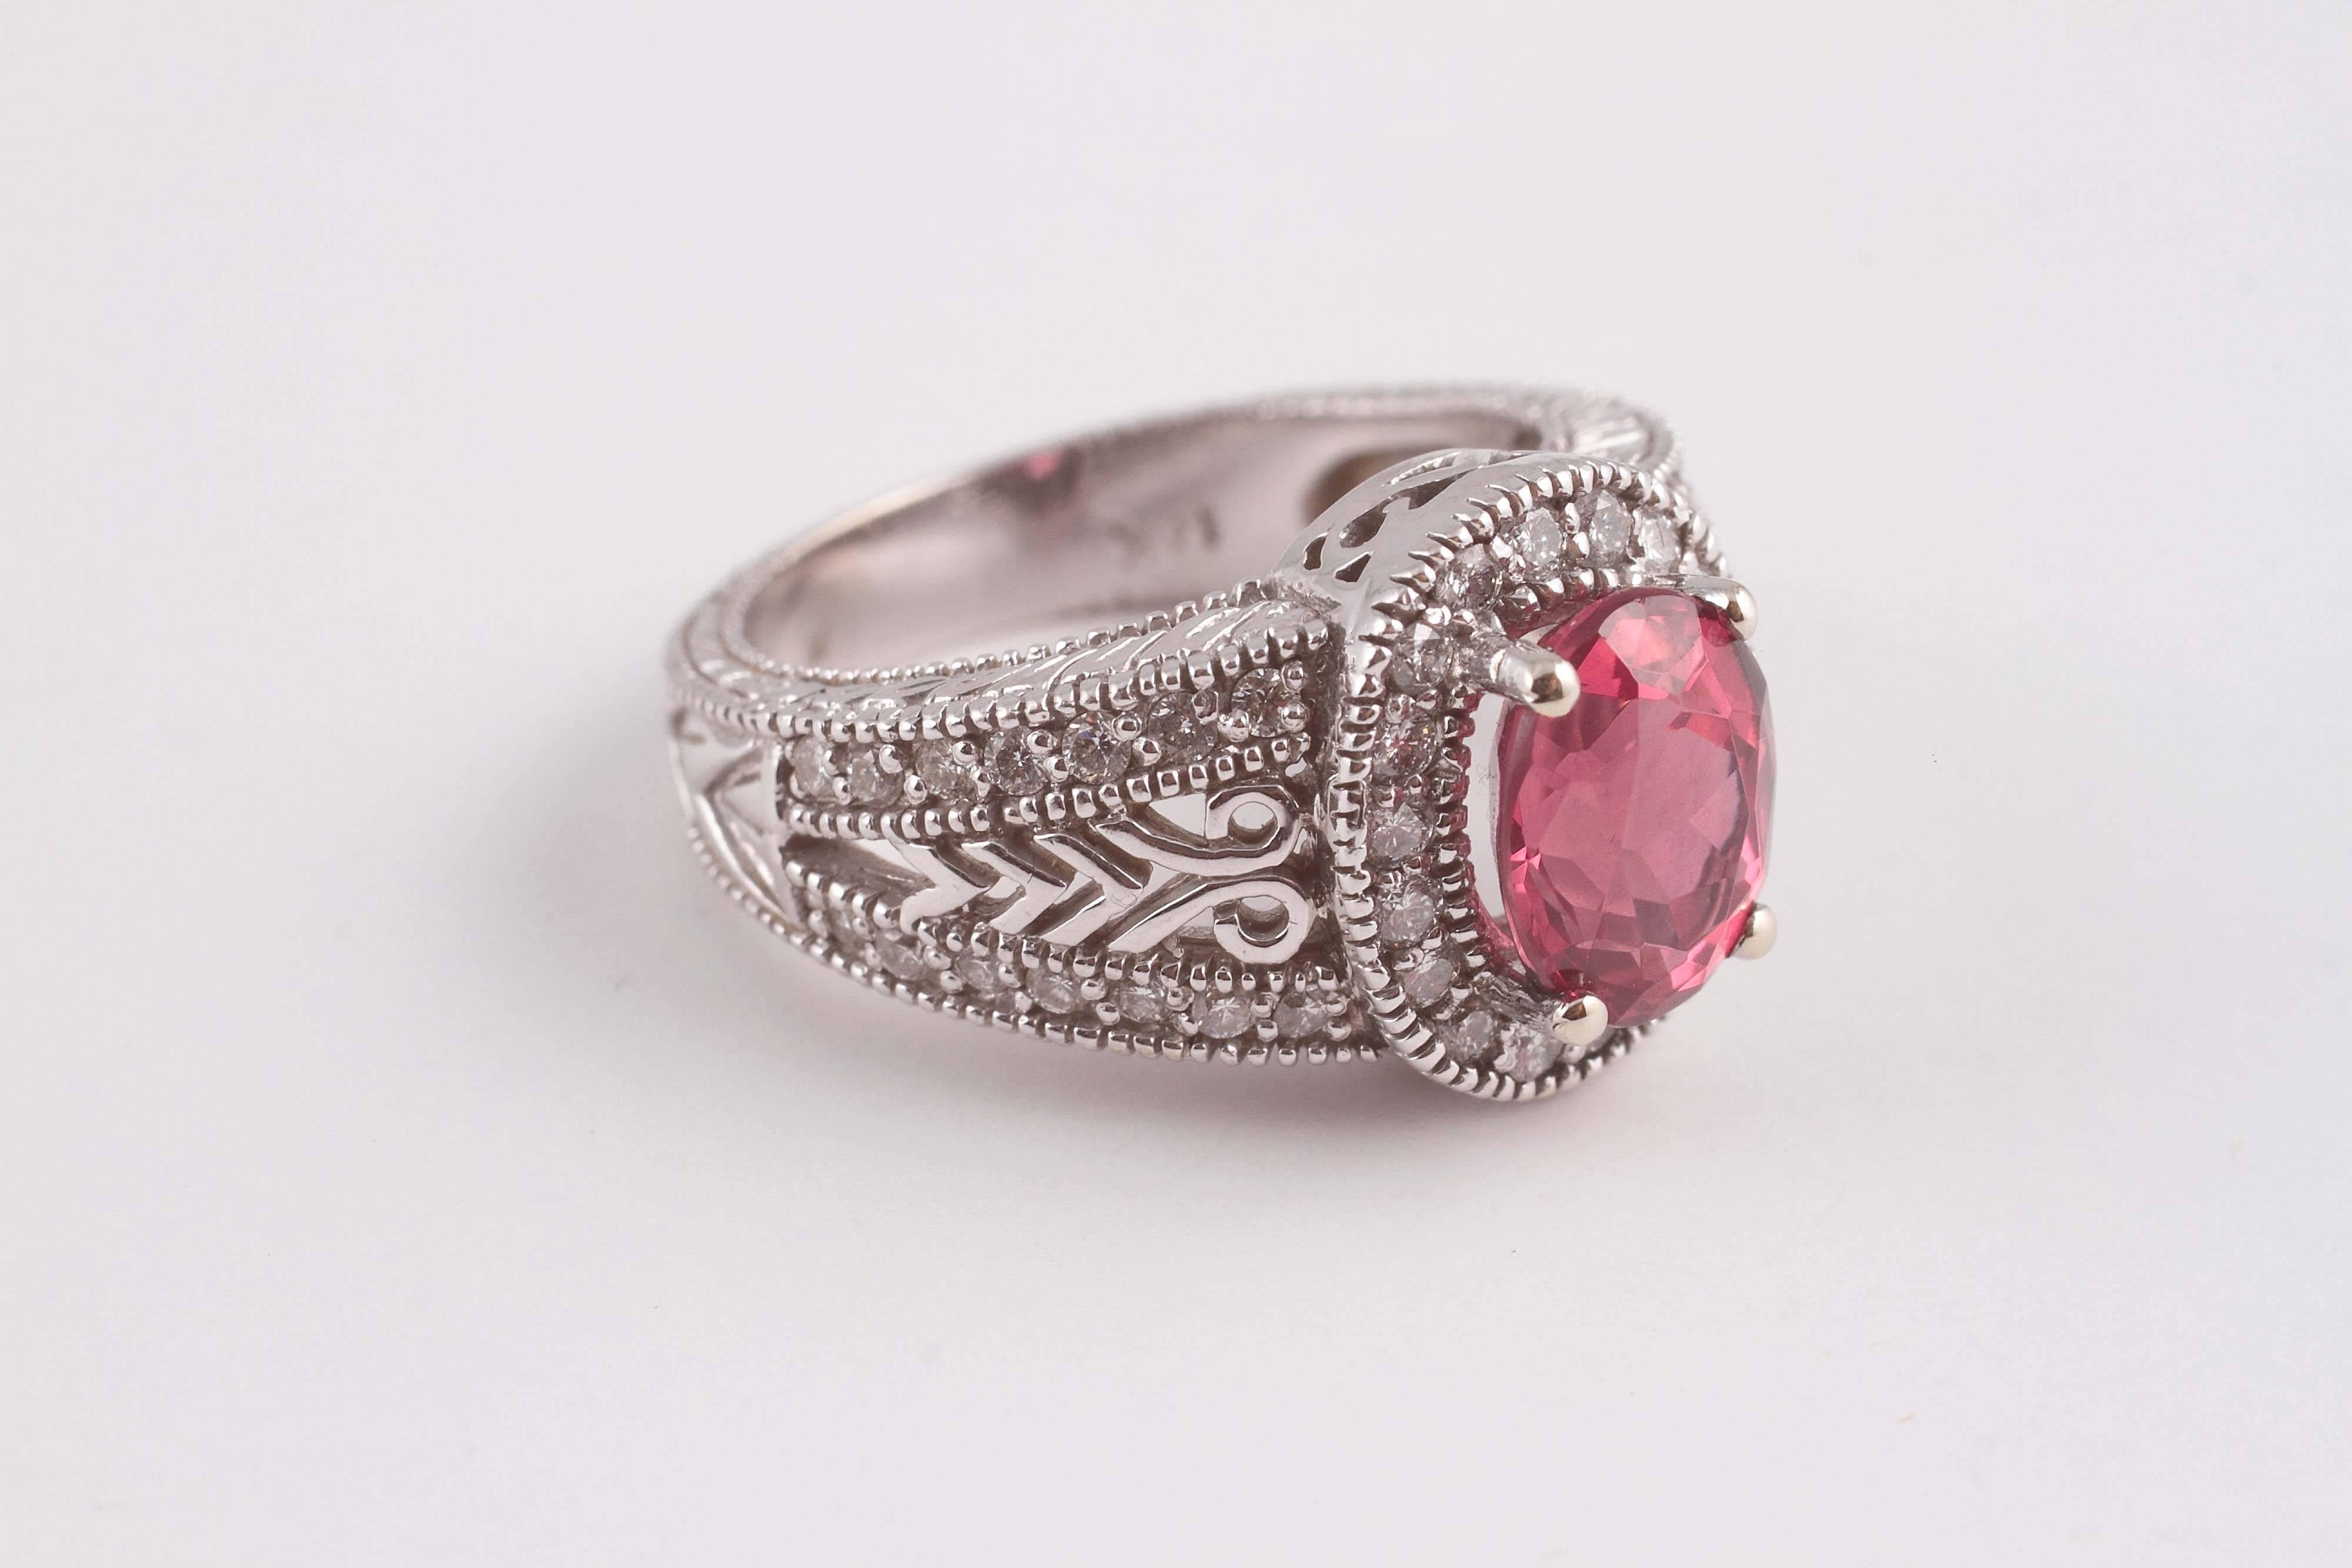 A natural spinel set into a filigree 14 karat white gold and diamond ring, size 7, GIA certificate on the center confirming the stone is naturally mined.  A truly beautiful look and a brilliant gem.  